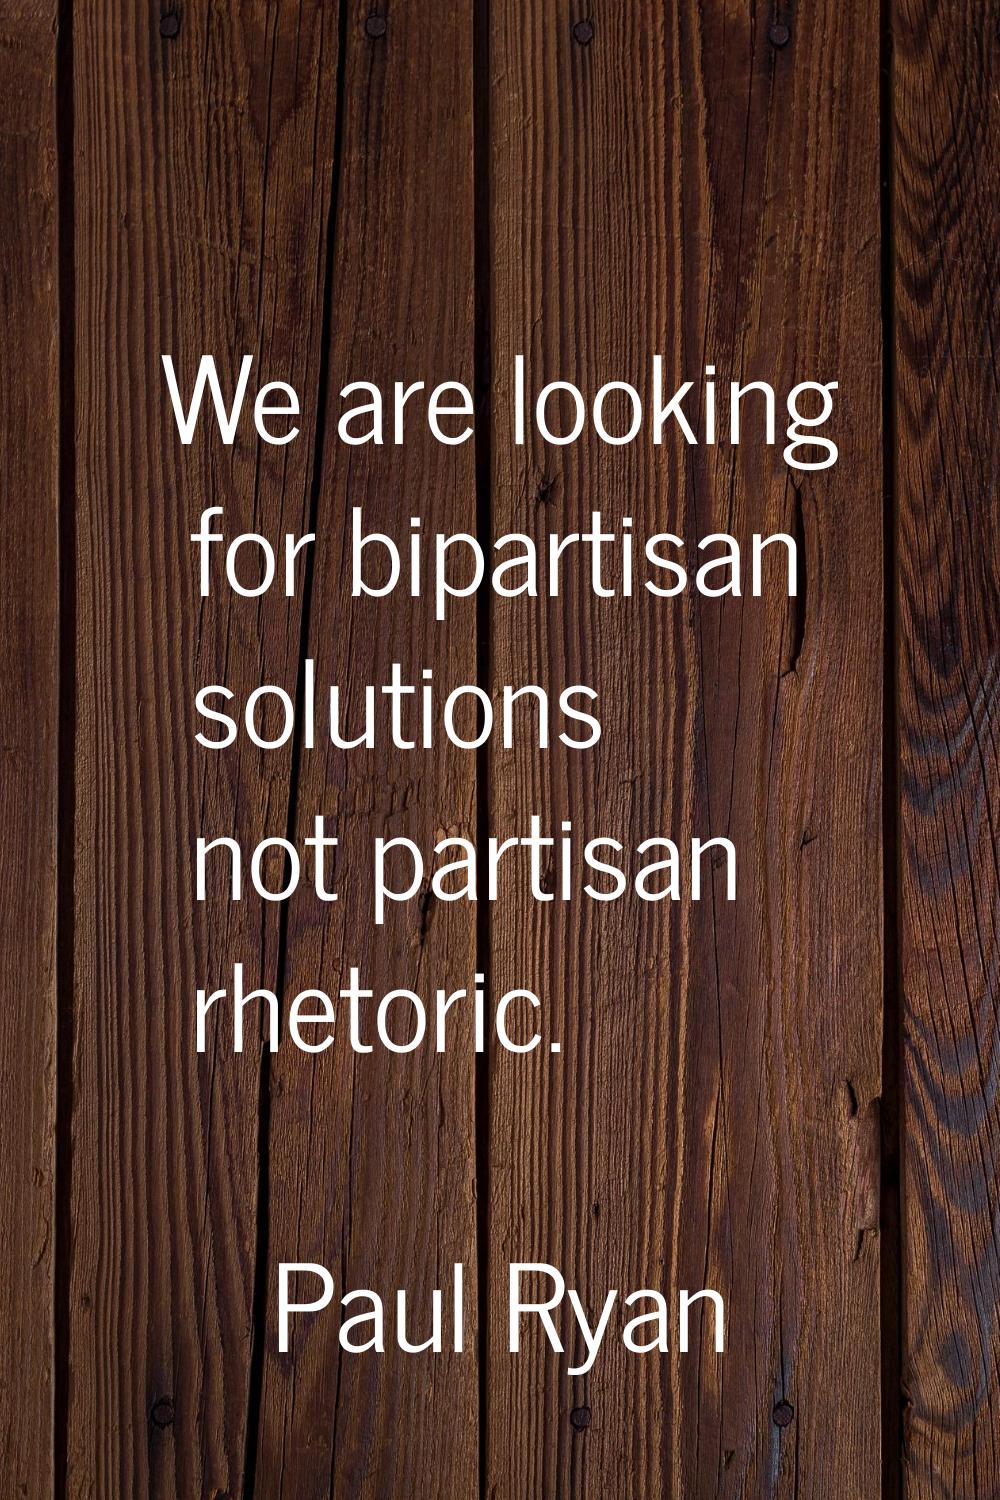 We are looking for bipartisan solutions not partisan rhetoric.